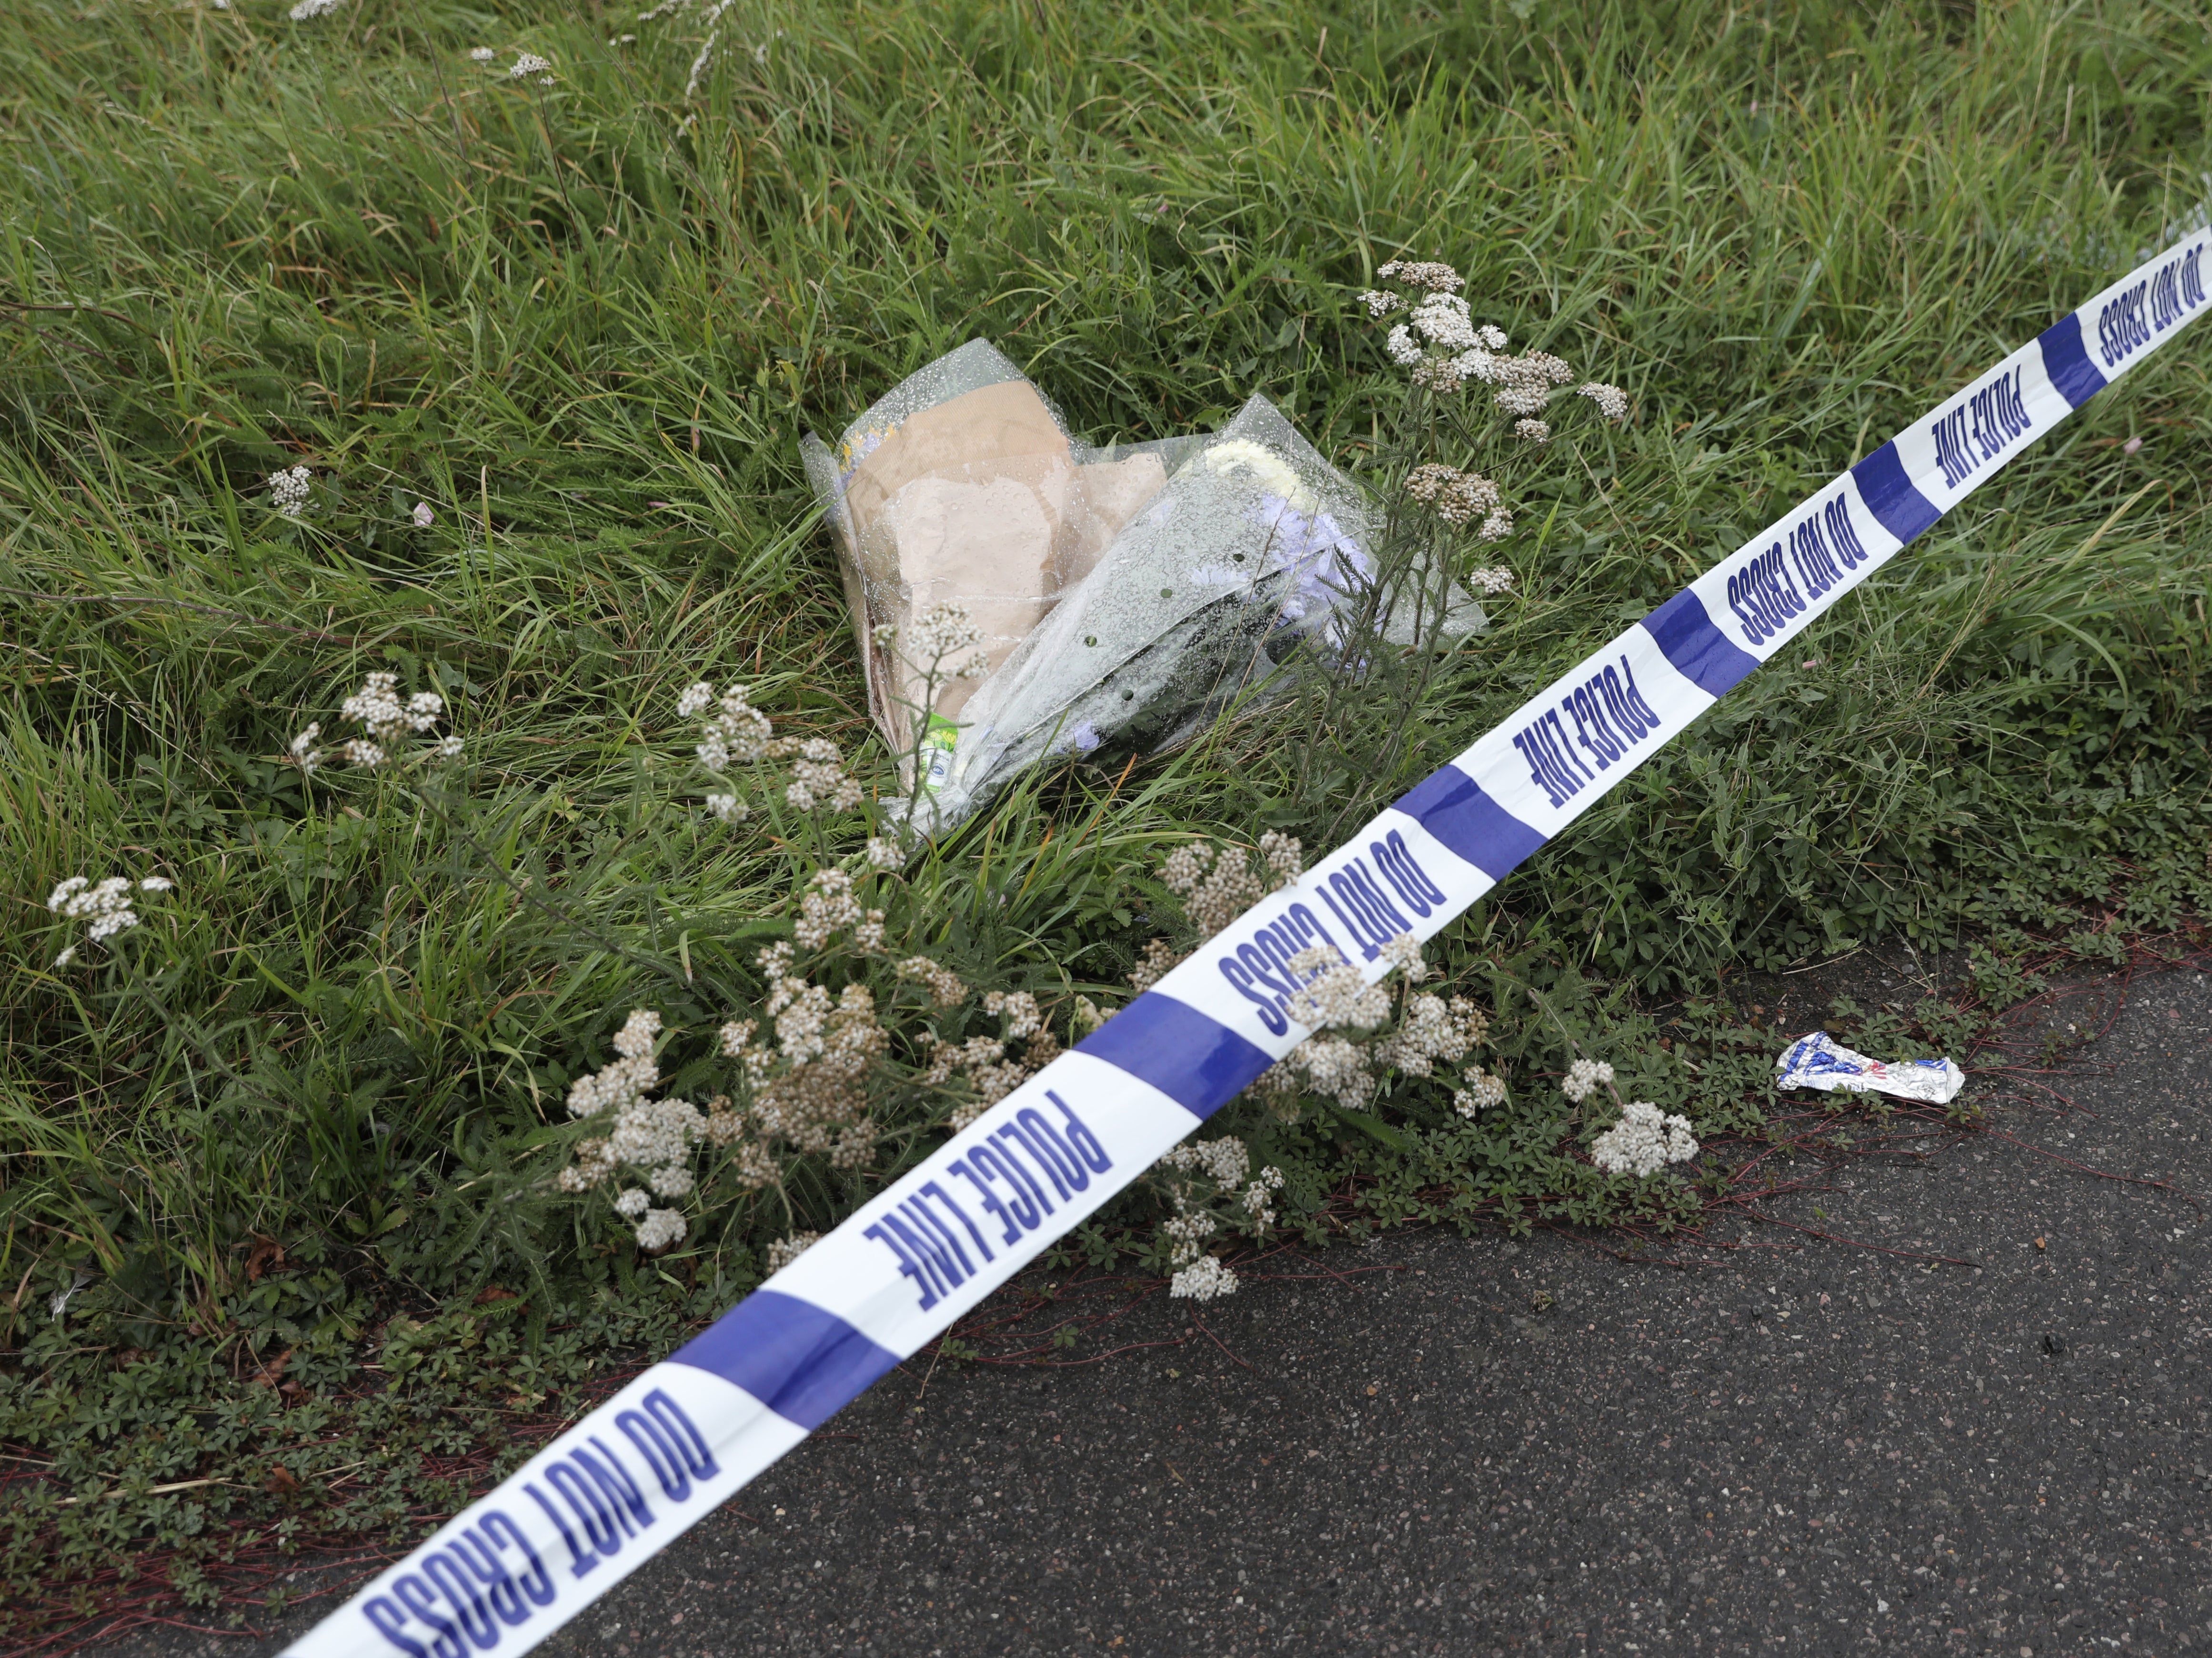 Attack took place on Bugs Bottom fields in Emmer Green